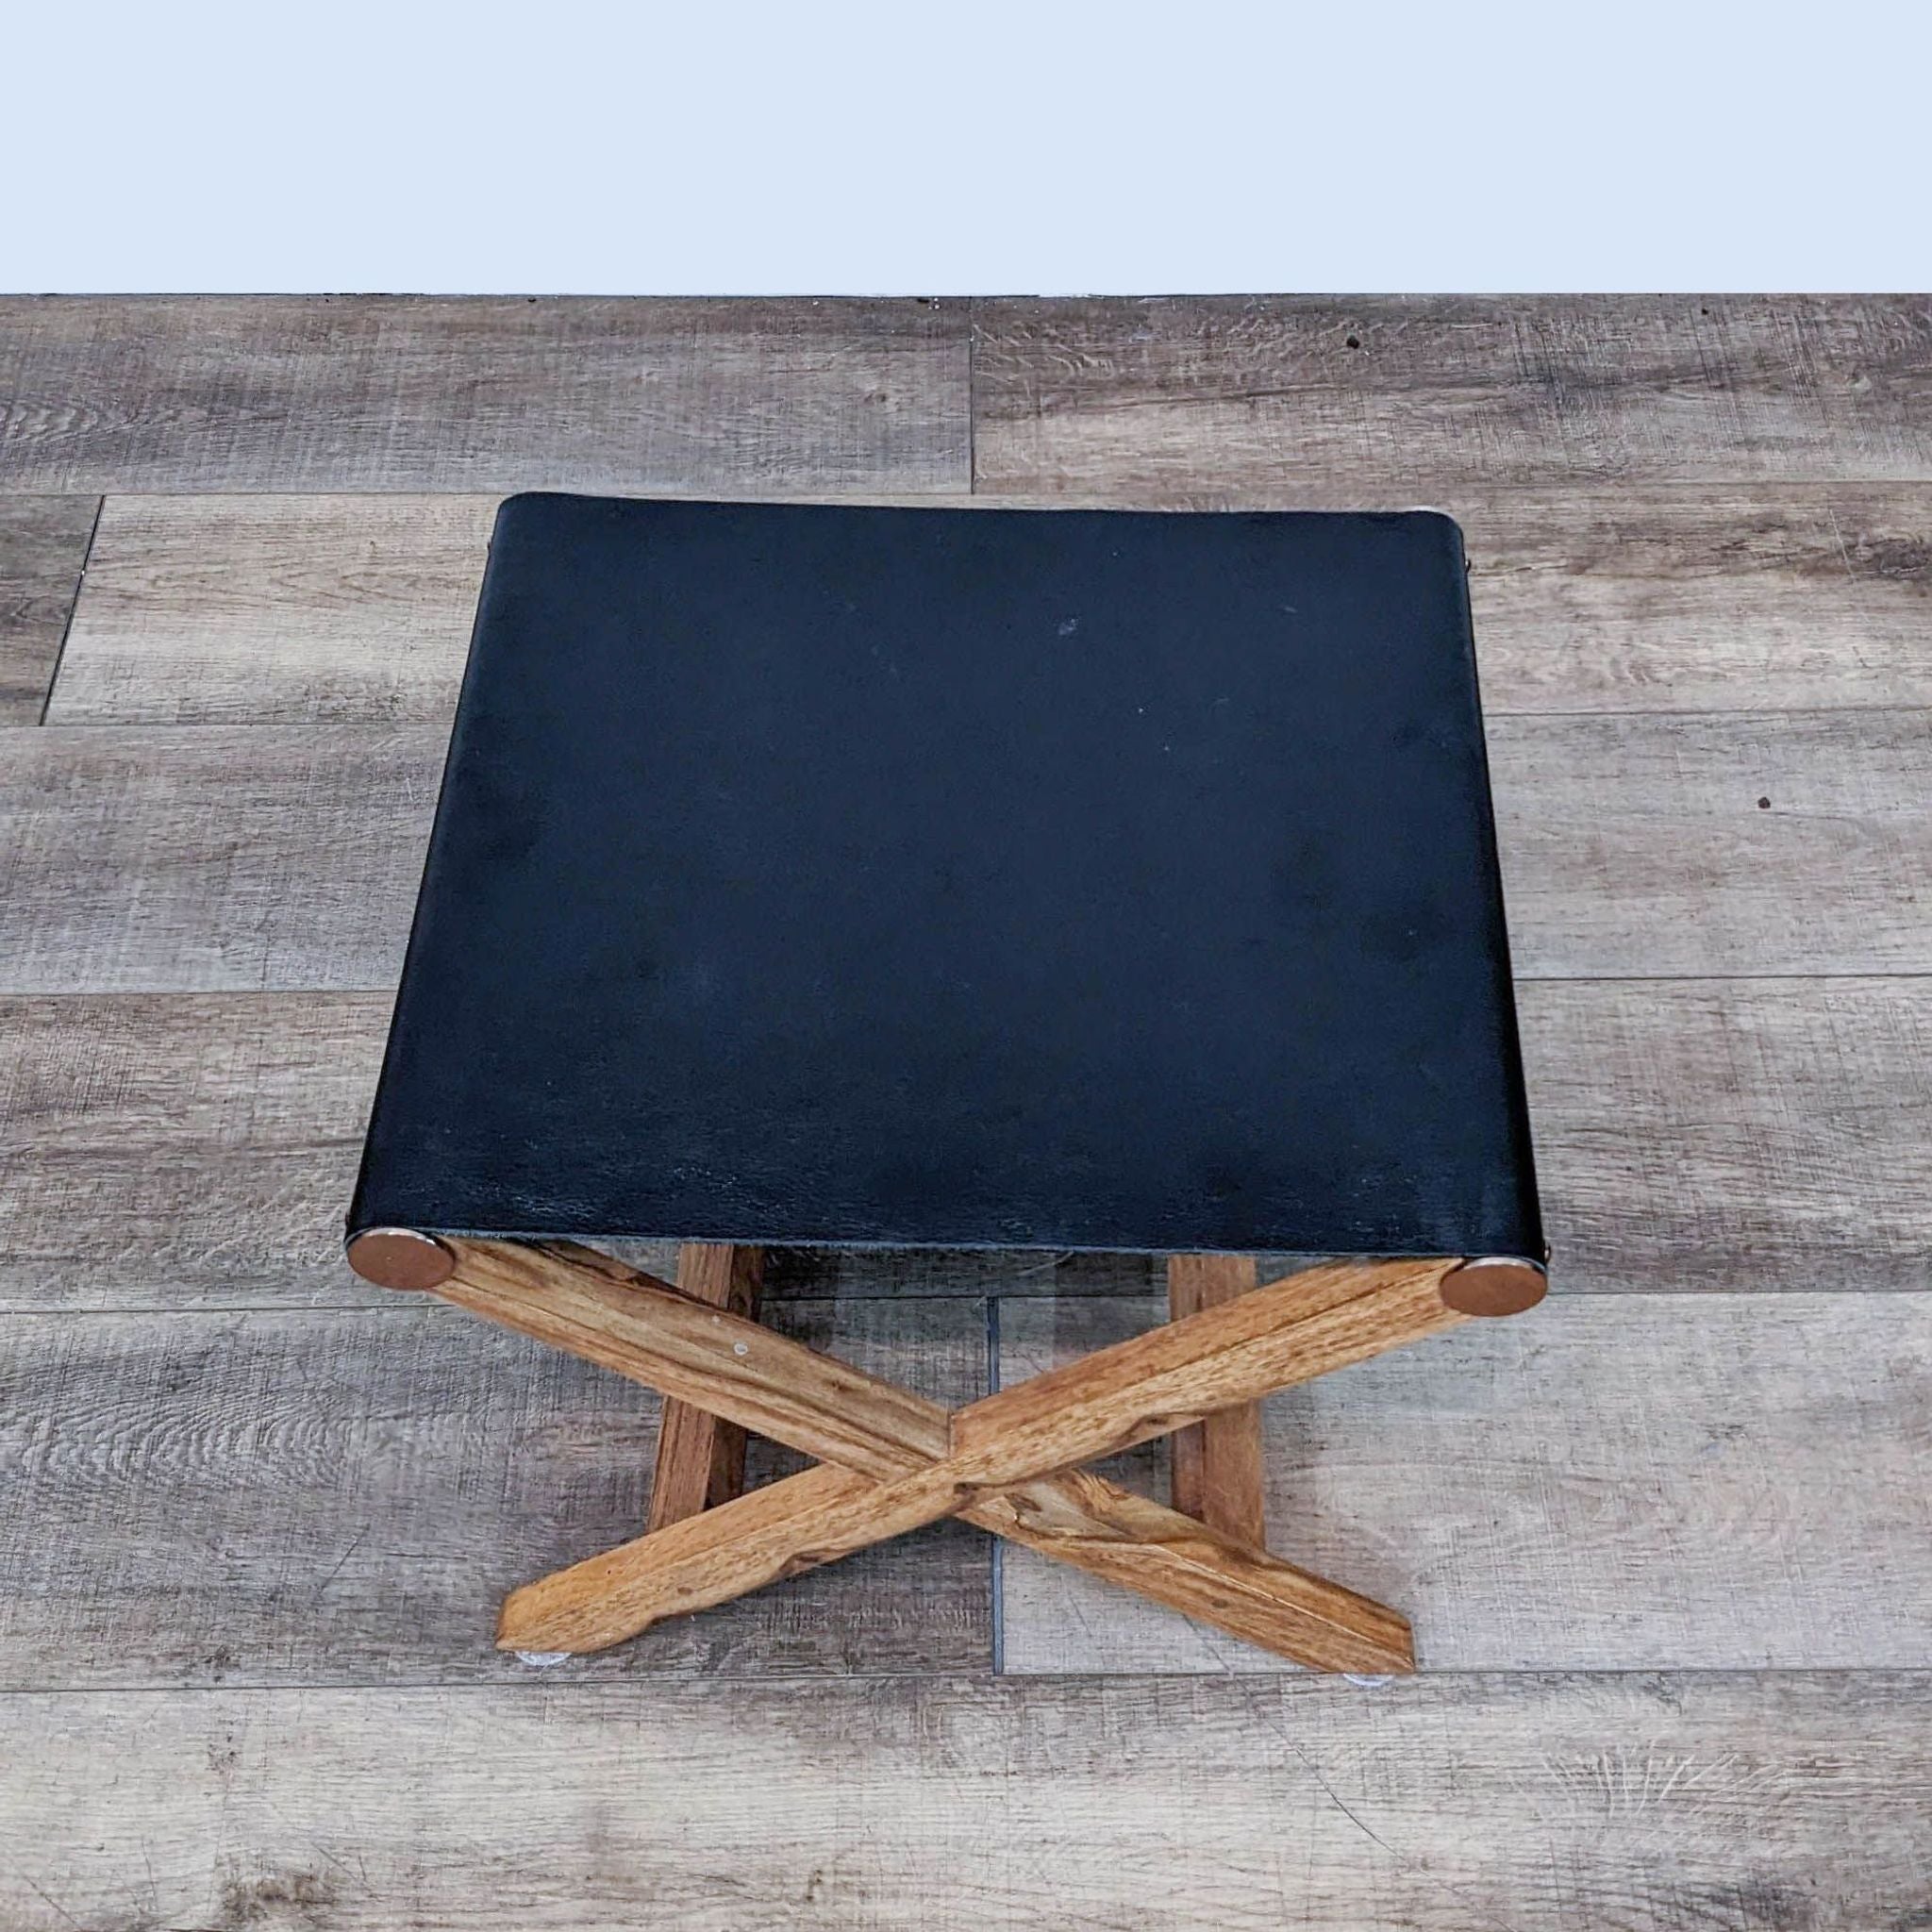 CB2 modern ottoman with black leather seat on crisscrossed solid wood frame and metal accents.